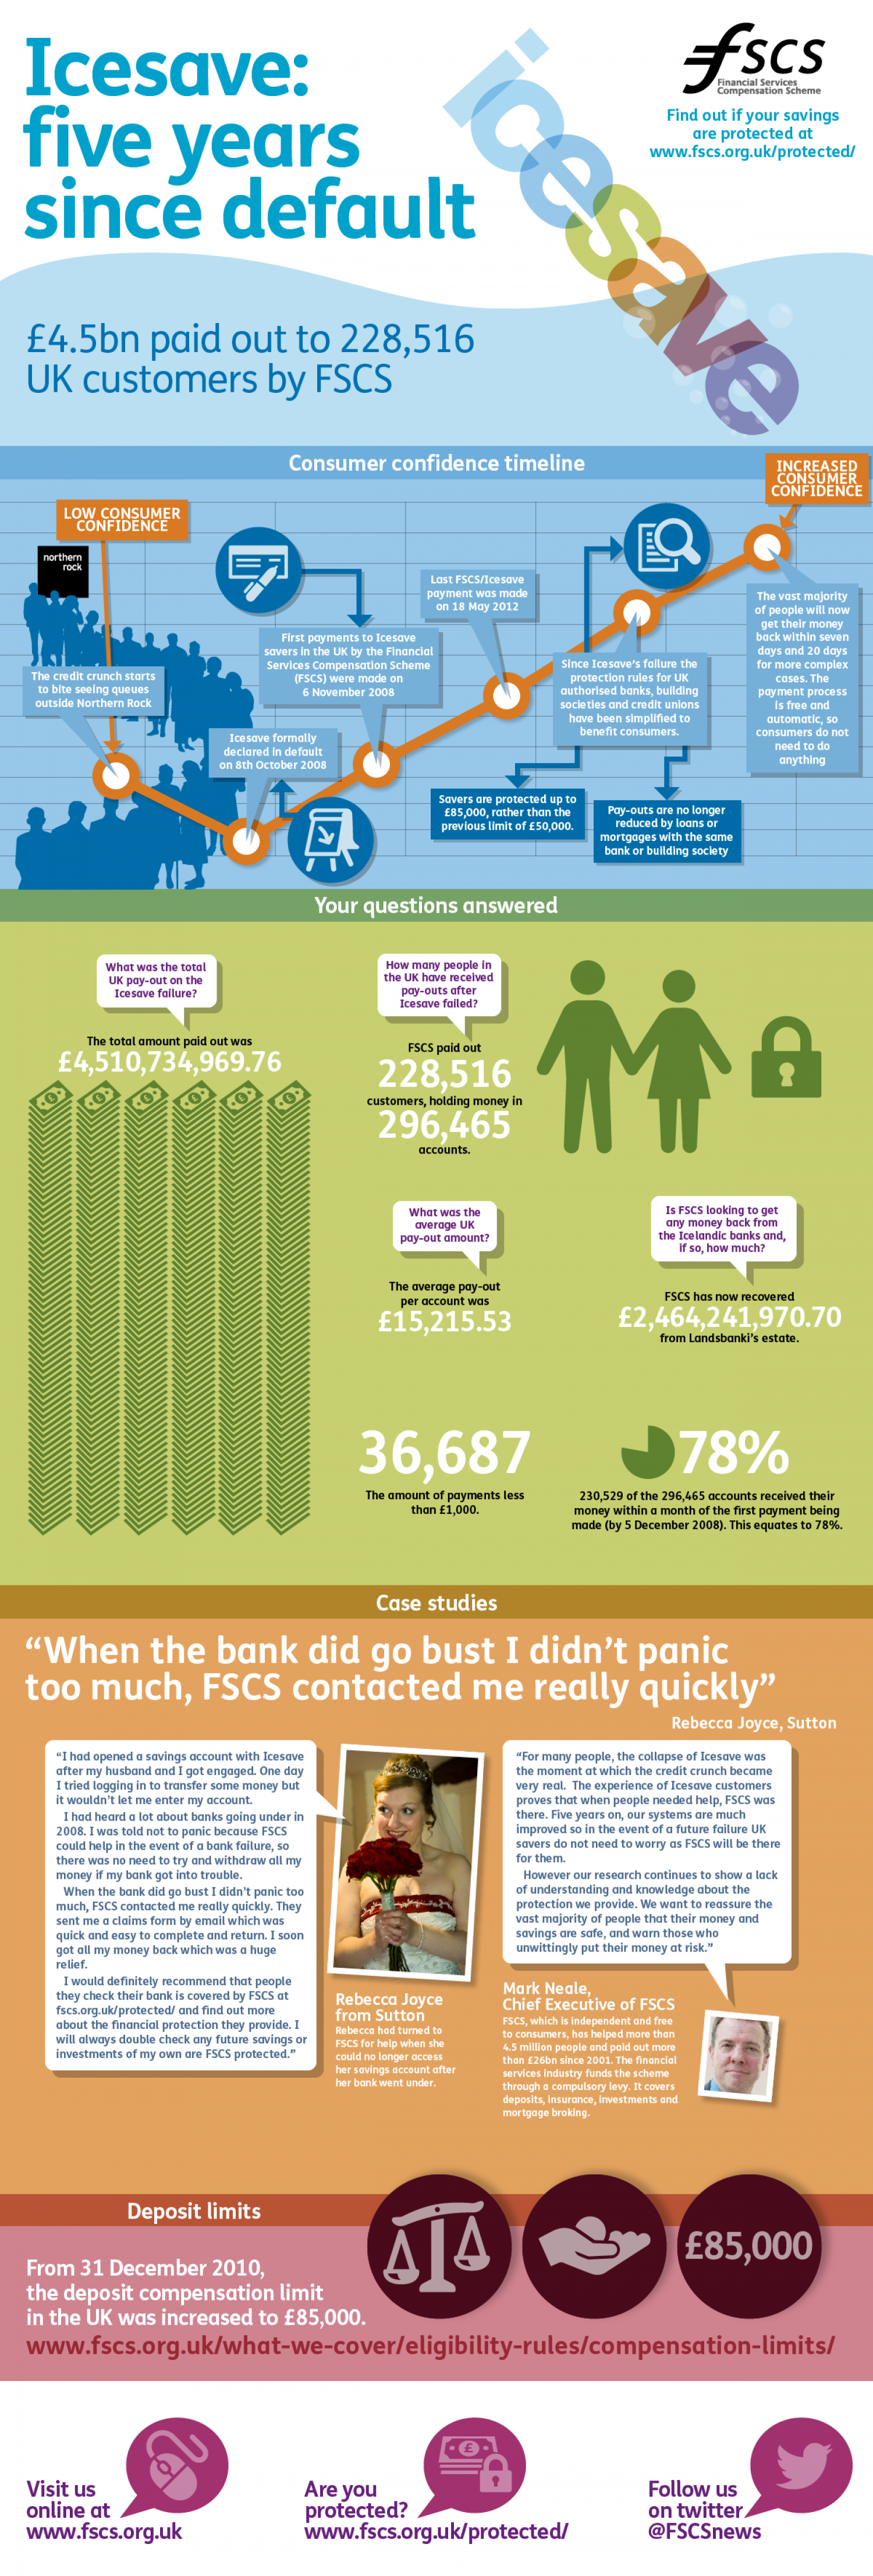 Icesave: five years since default Infographic